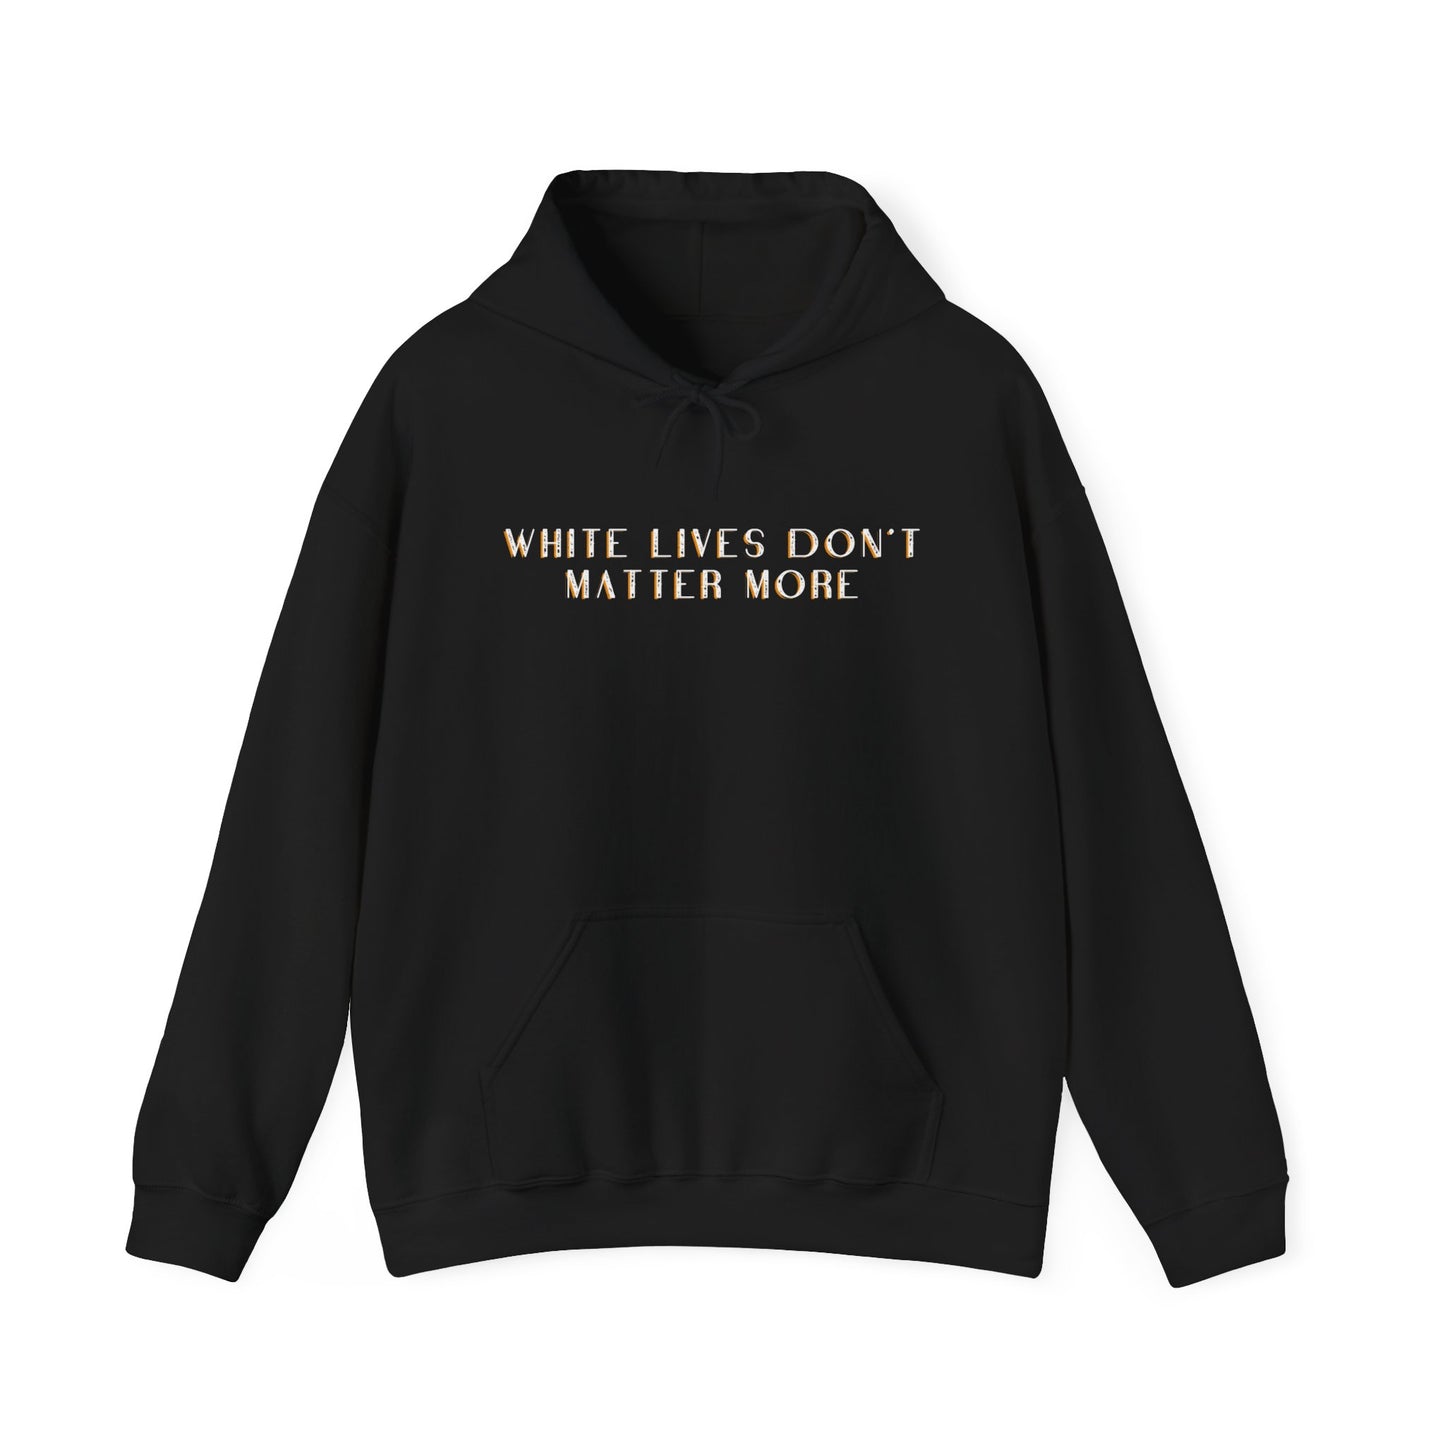 "White Lives Don't Matter More" HOODY Sweatshirt with Bold Text, No Graphic